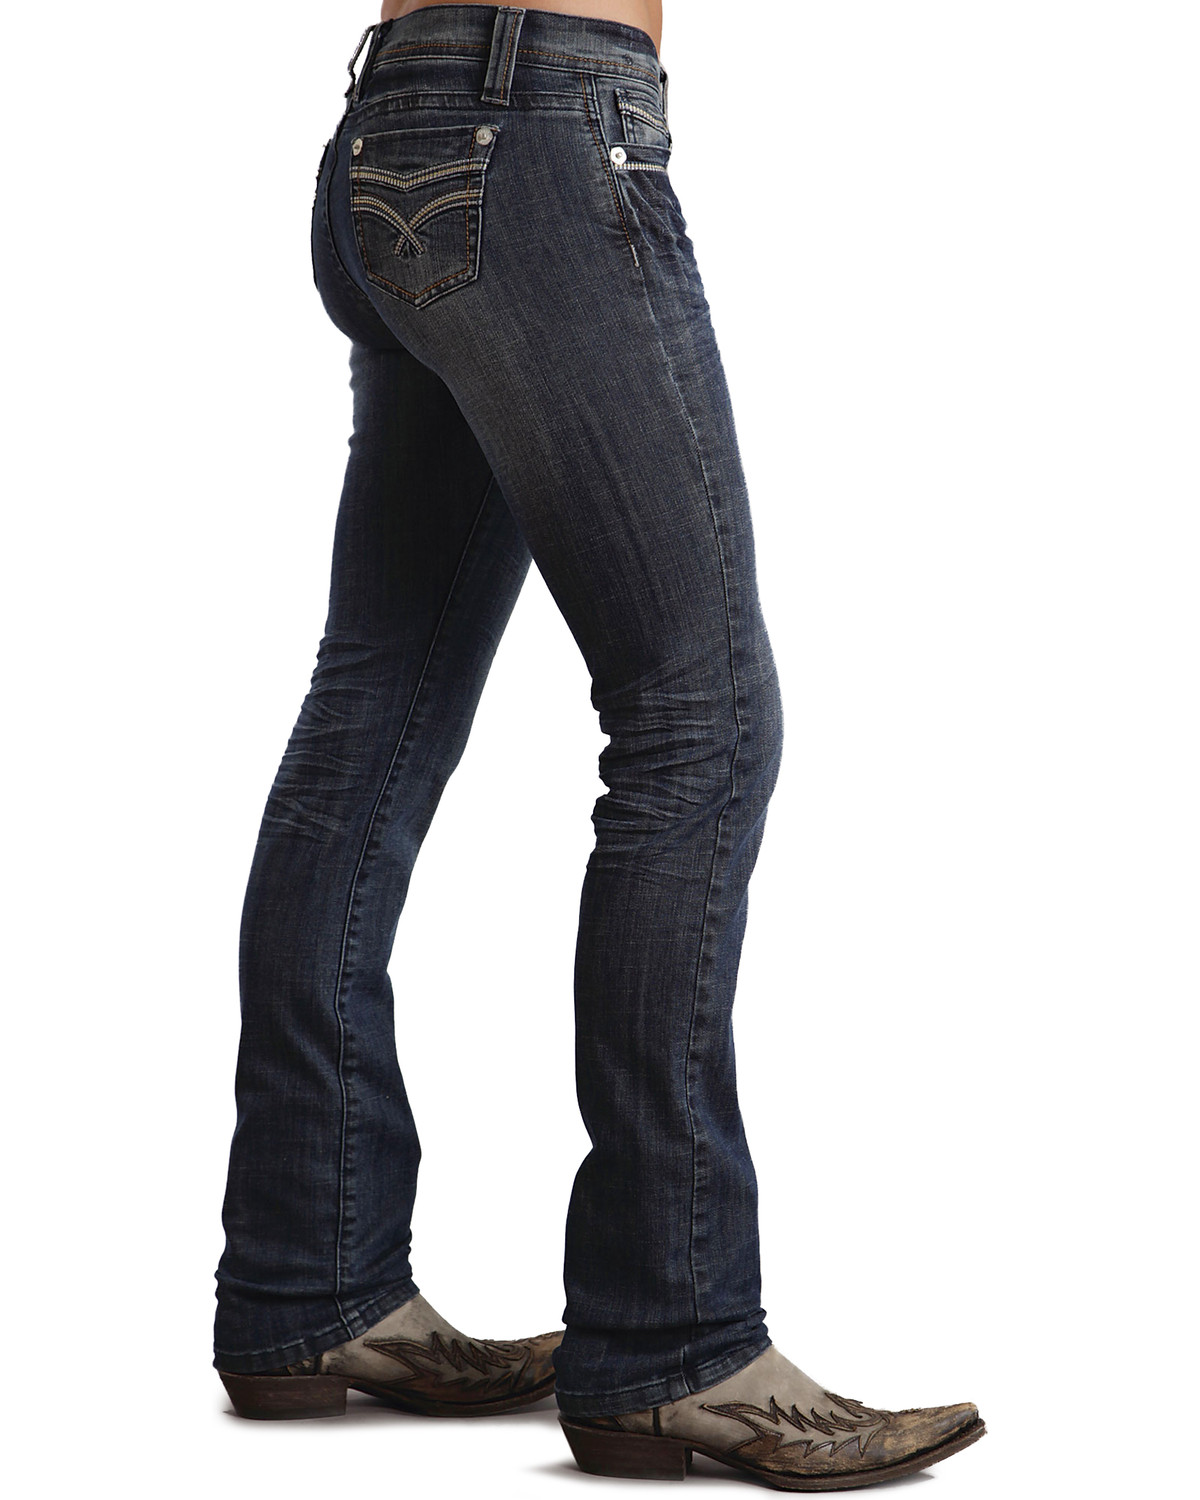 Stetson Women's Stovepipe Straight Leg Jeans | Boot Barn